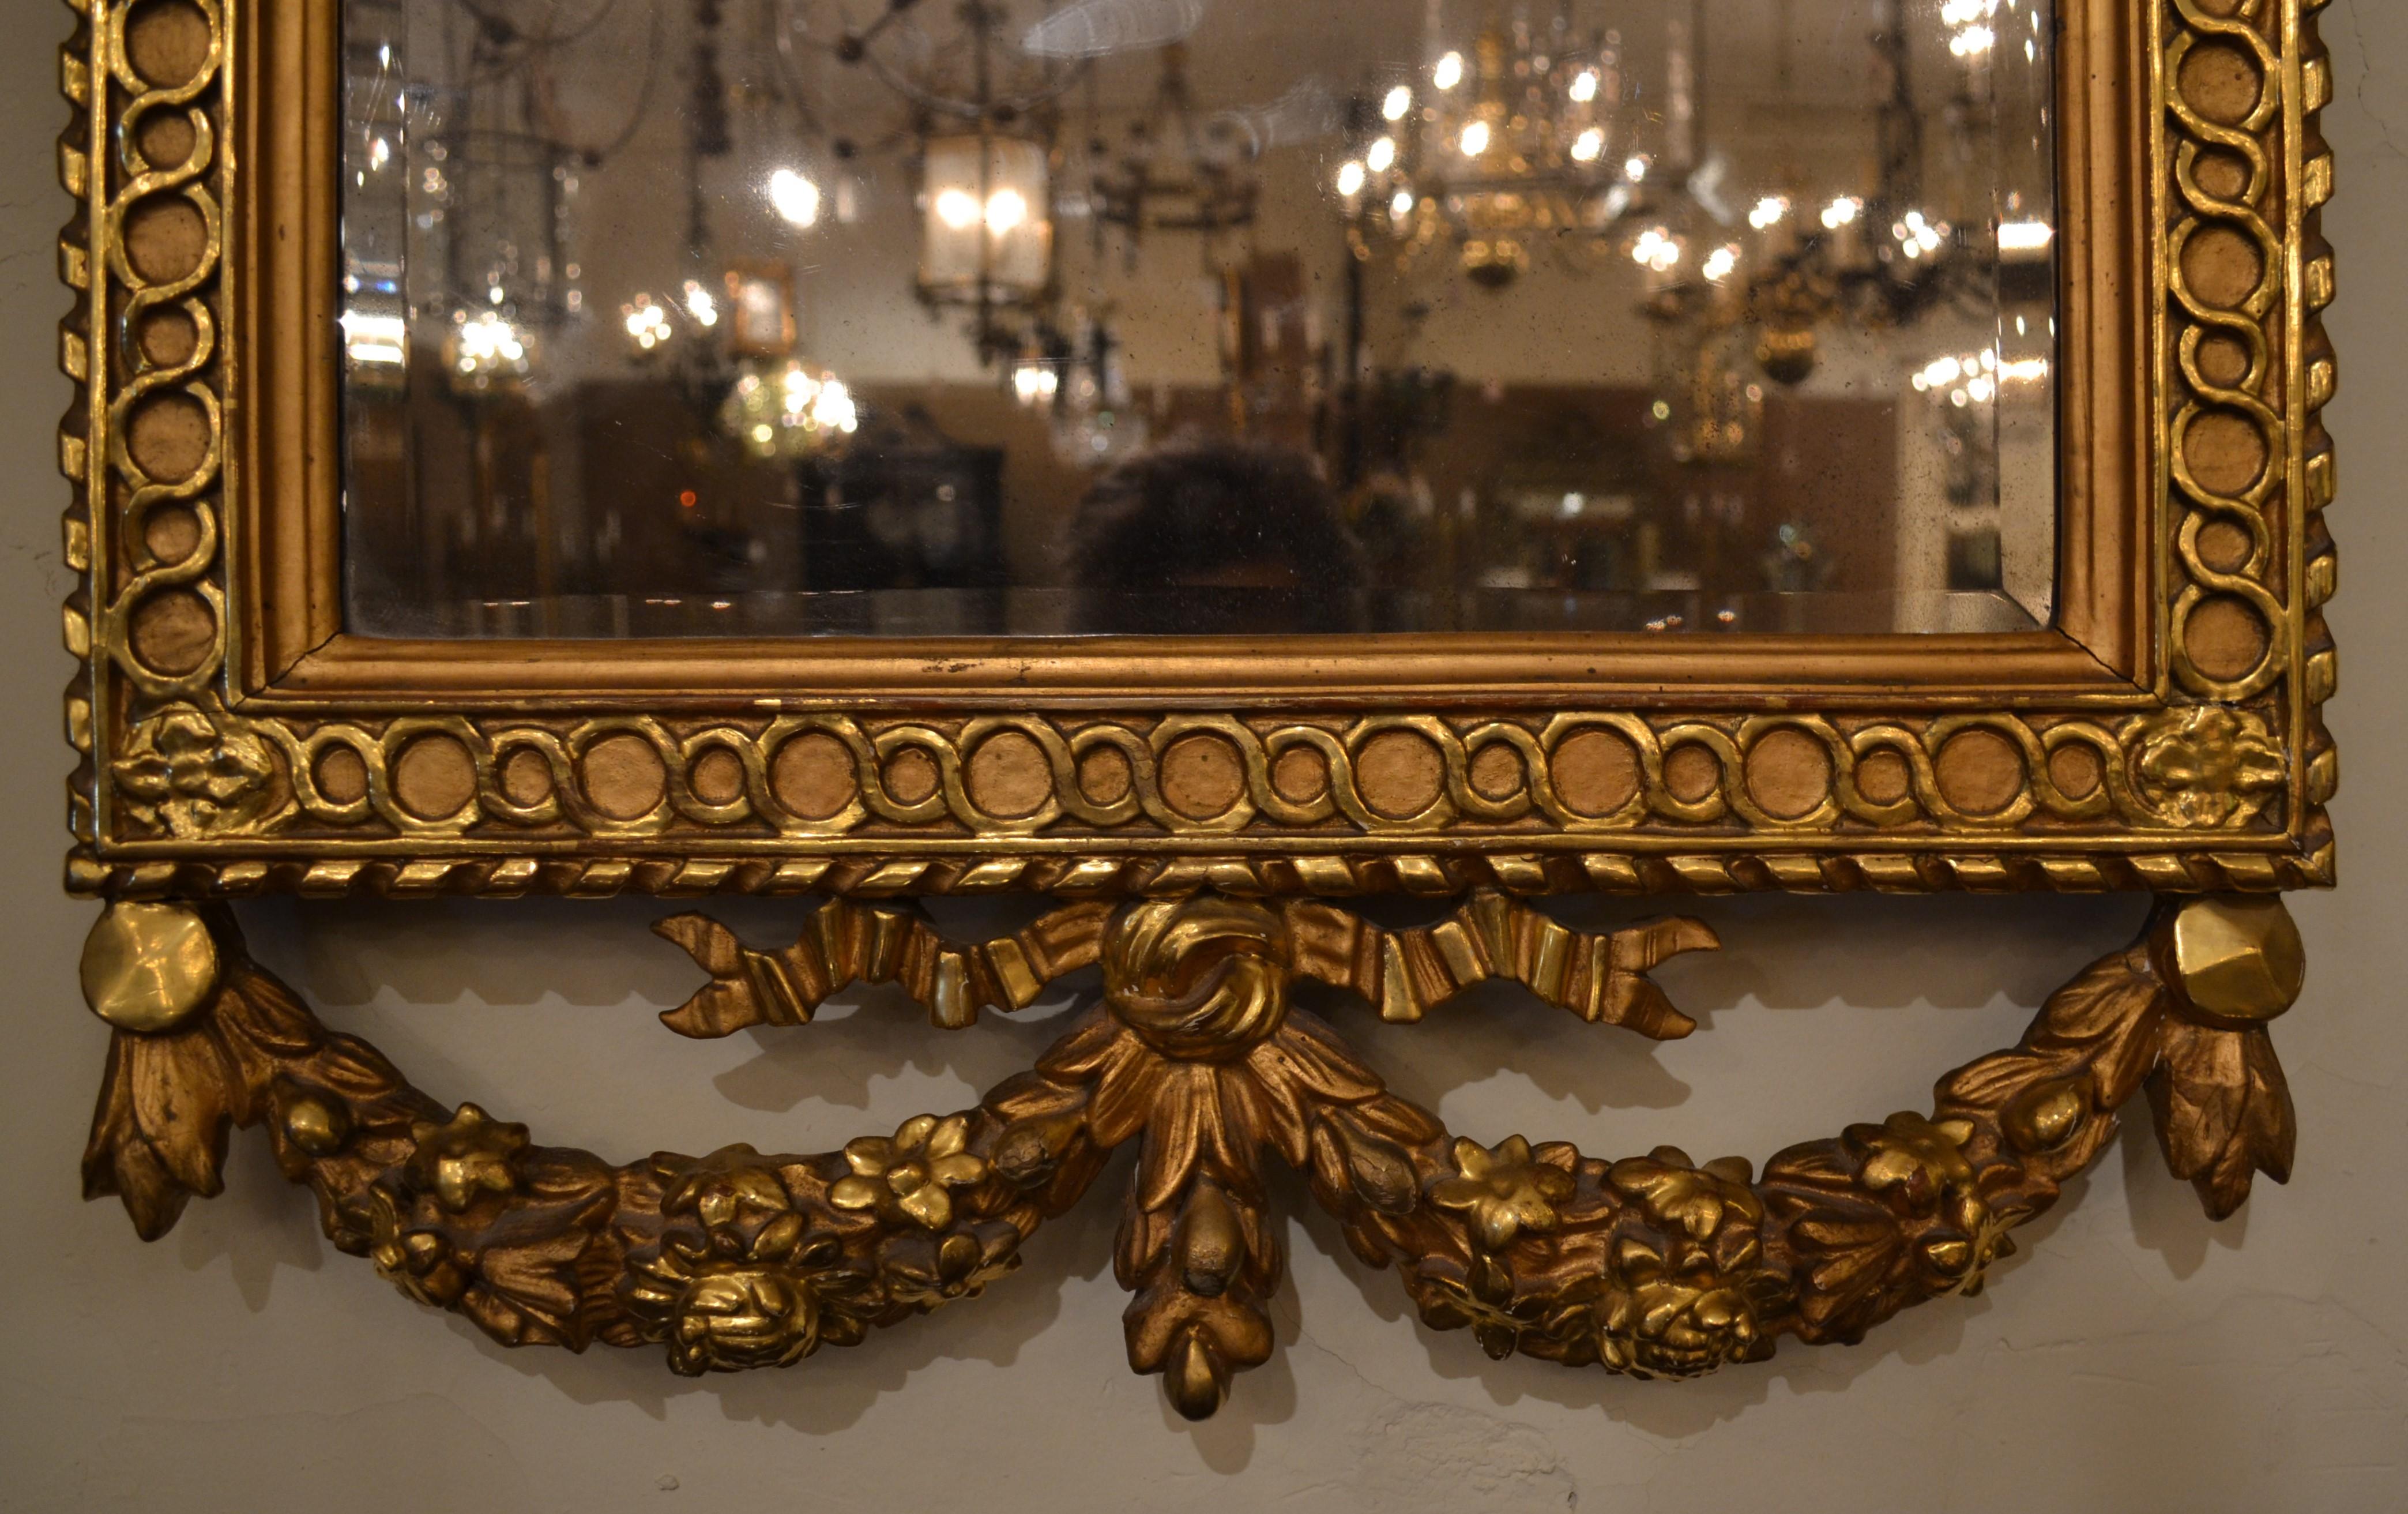 Antique gold pier mirror. Very appealing in its straight form and nicely decorated, this mirror is also quite narrow so it would work in a variety of settings or rooms where horizontal space is limited.